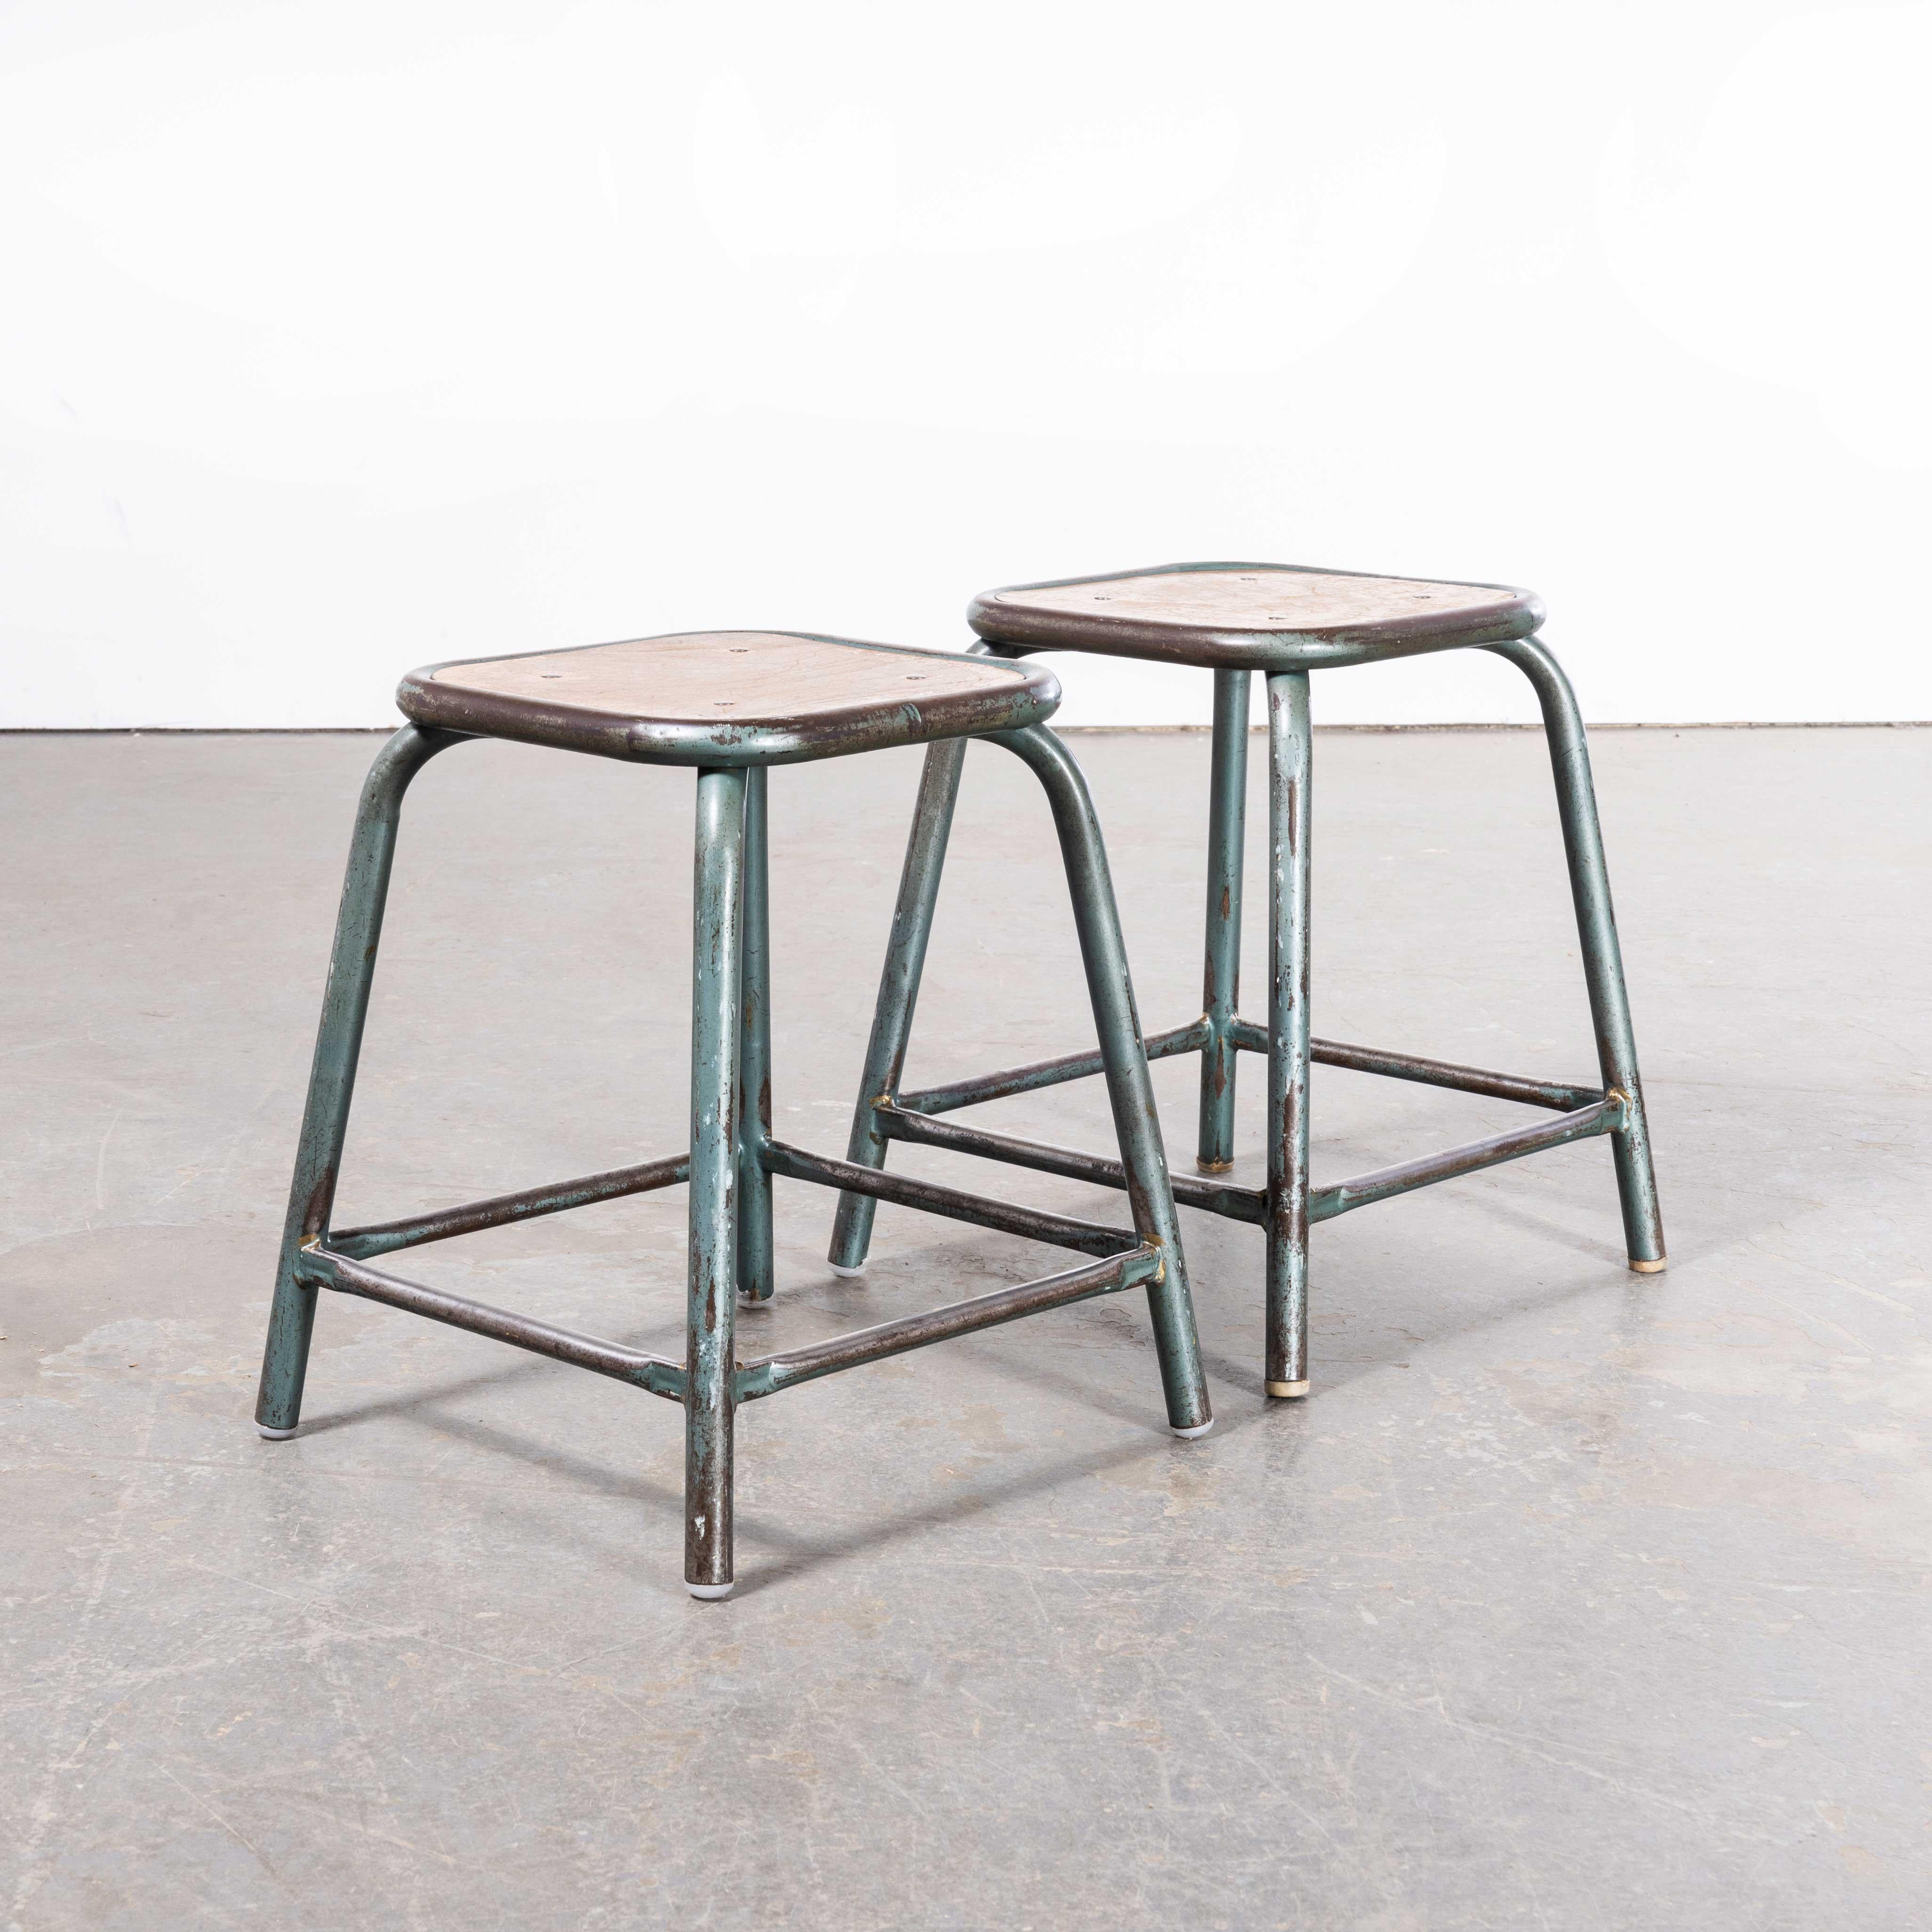 1960’s Mullca Low Stacking Stool – Aqua – Pair
1960’s Mullca Low Stacking Stool – Aqua – Pair. In 1947 Robert Muller and Gaston Cavaillon created the company that went on to develop arguably the most famous French school chair. Sadly the company no